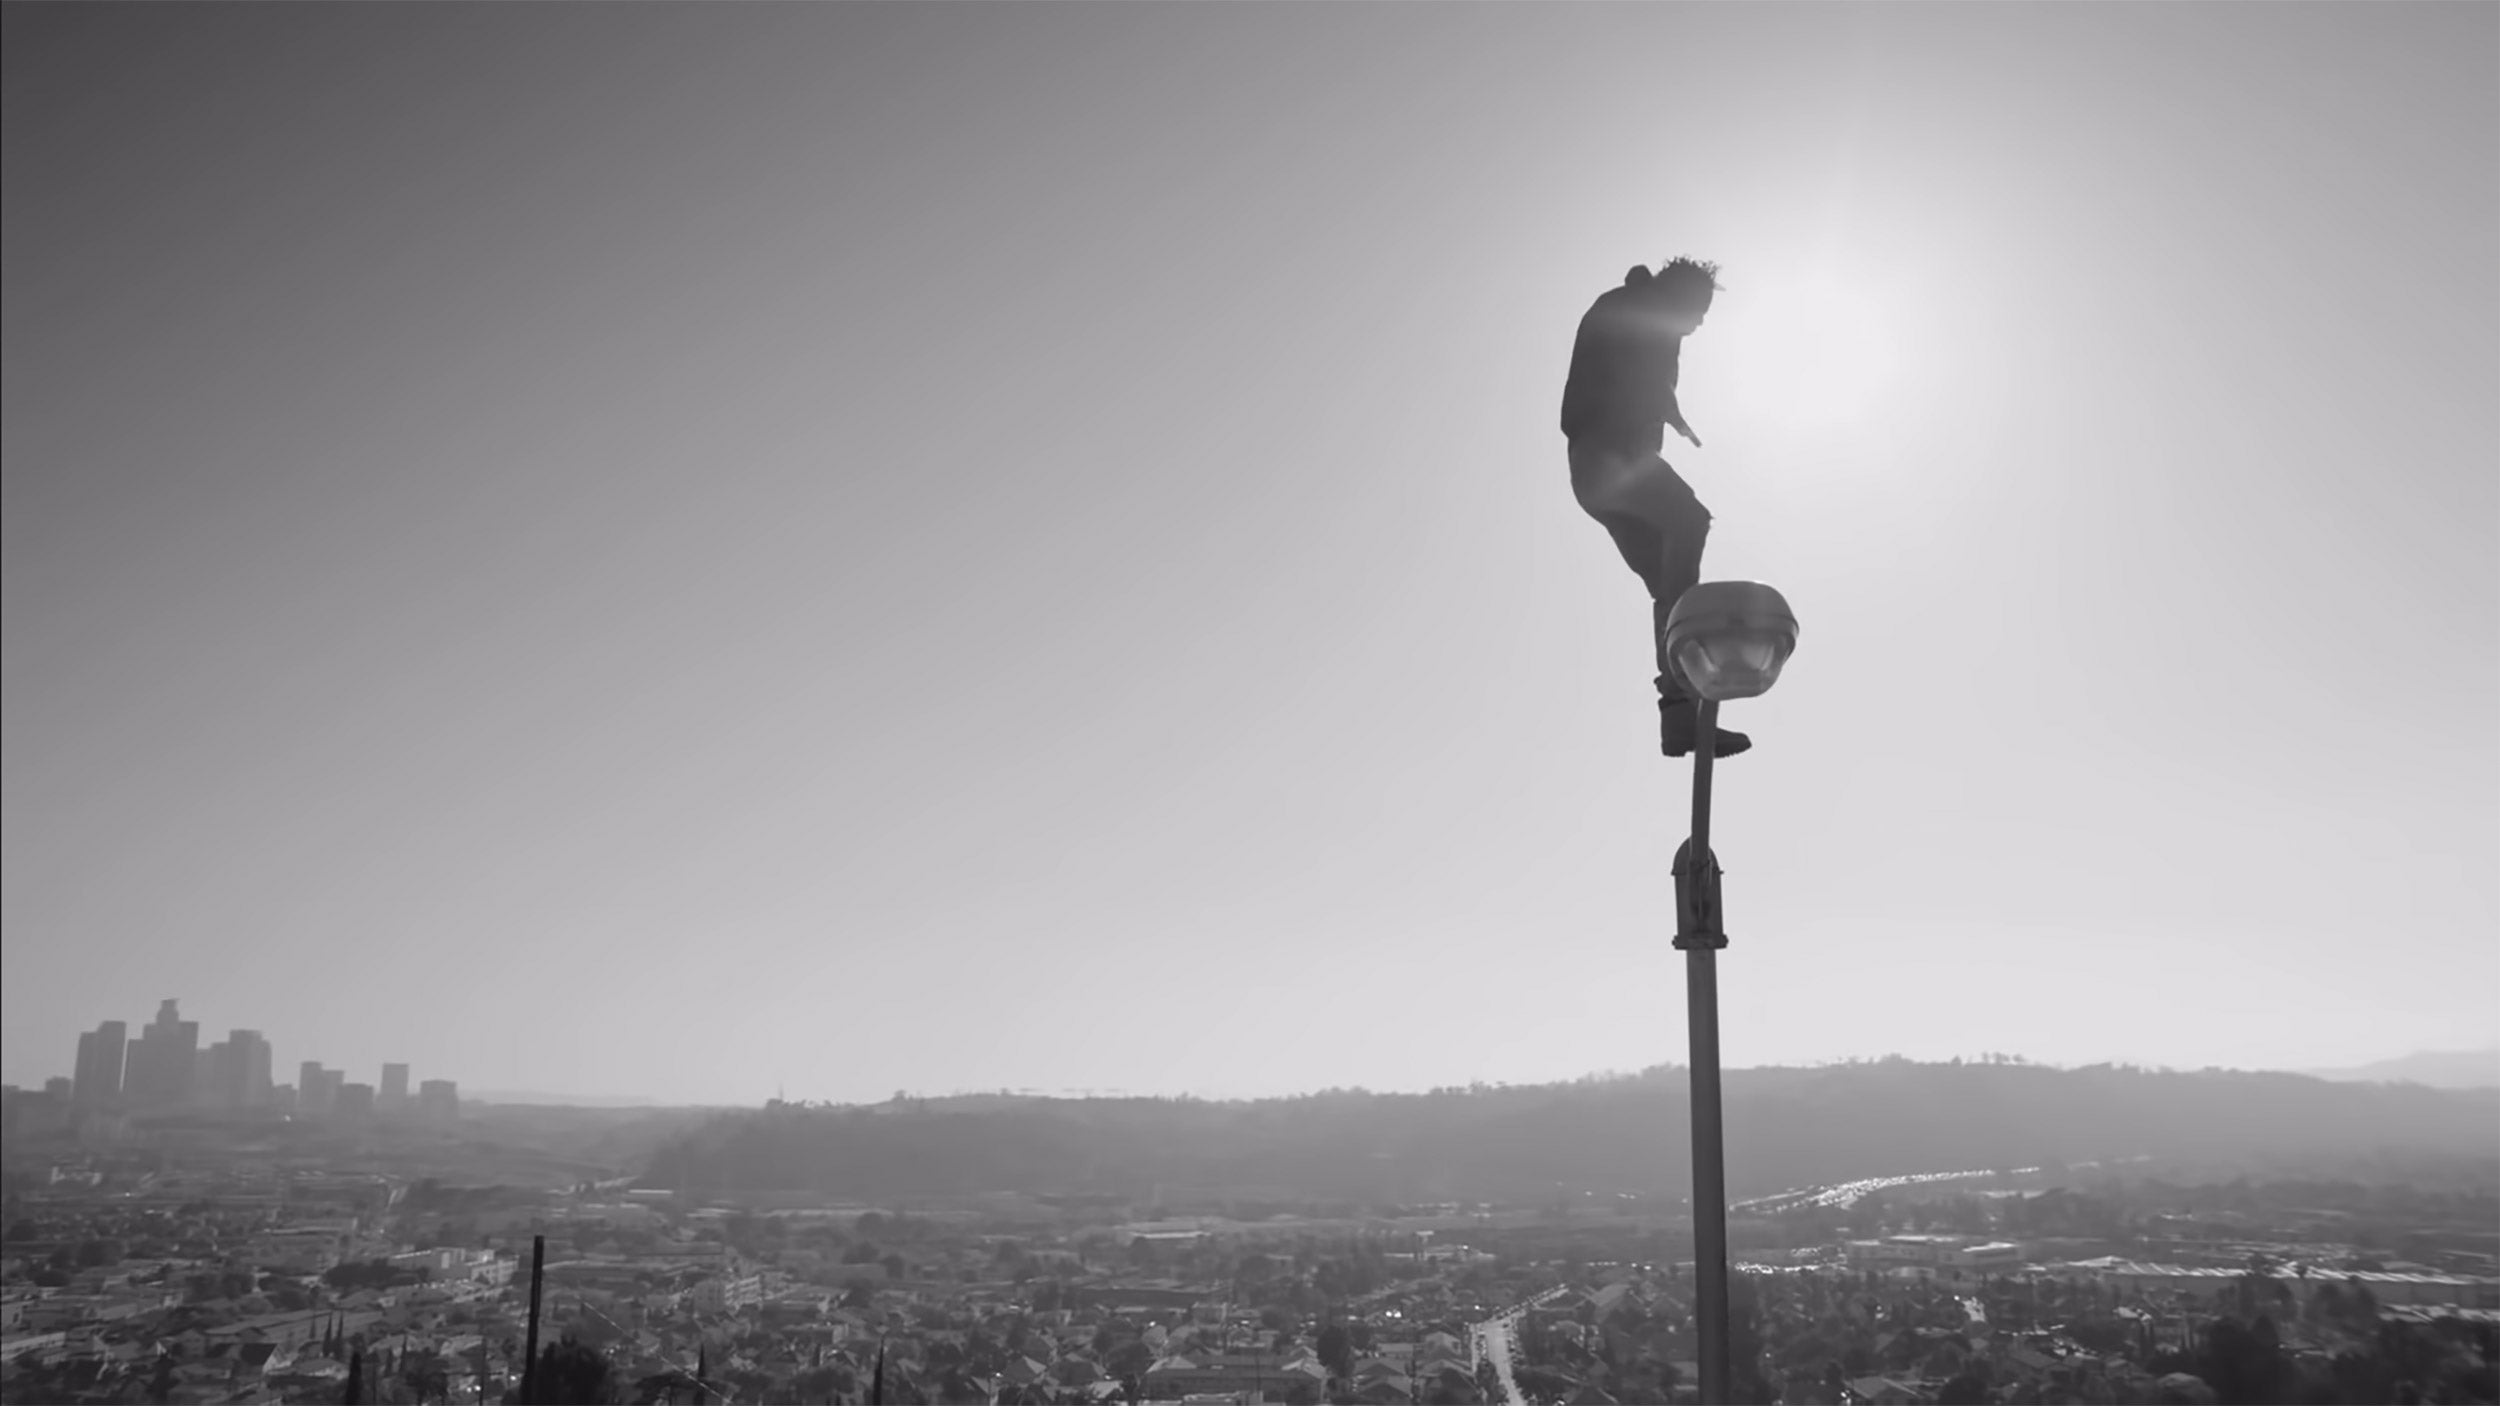 Kendrick Lamar stands on lamppost towering over L.A. skyline in "Alright" video.